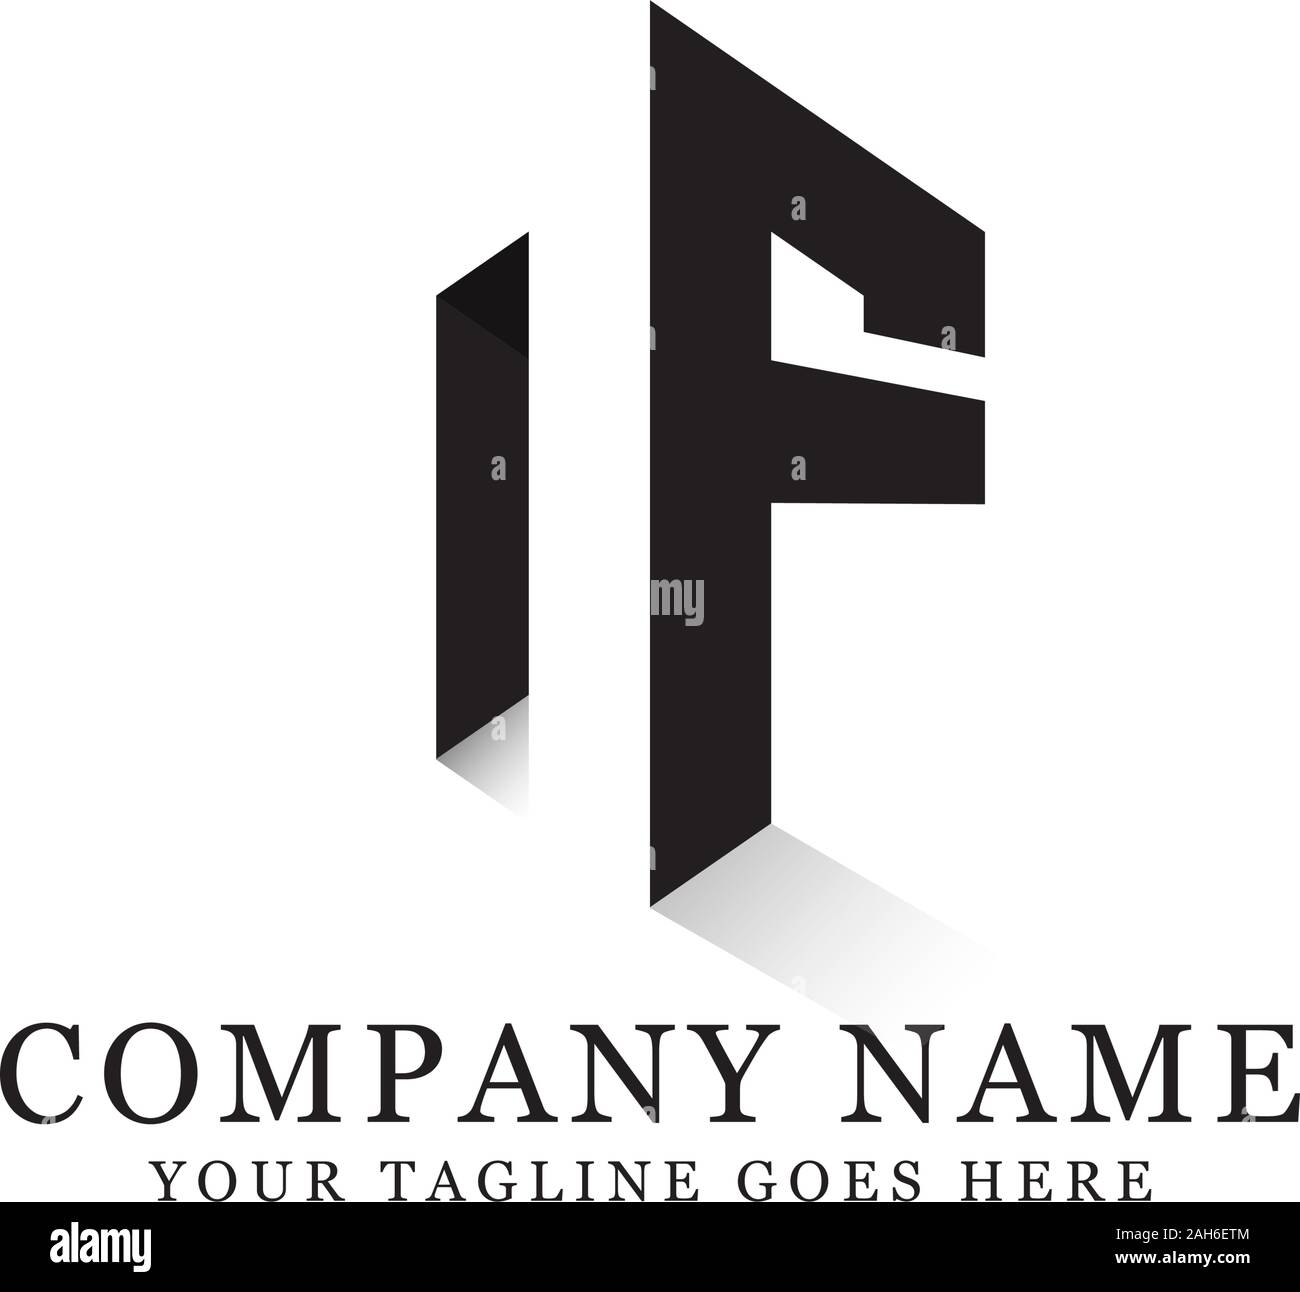 NF initial logo inspiration, negative space letter logo designs Stock Vector